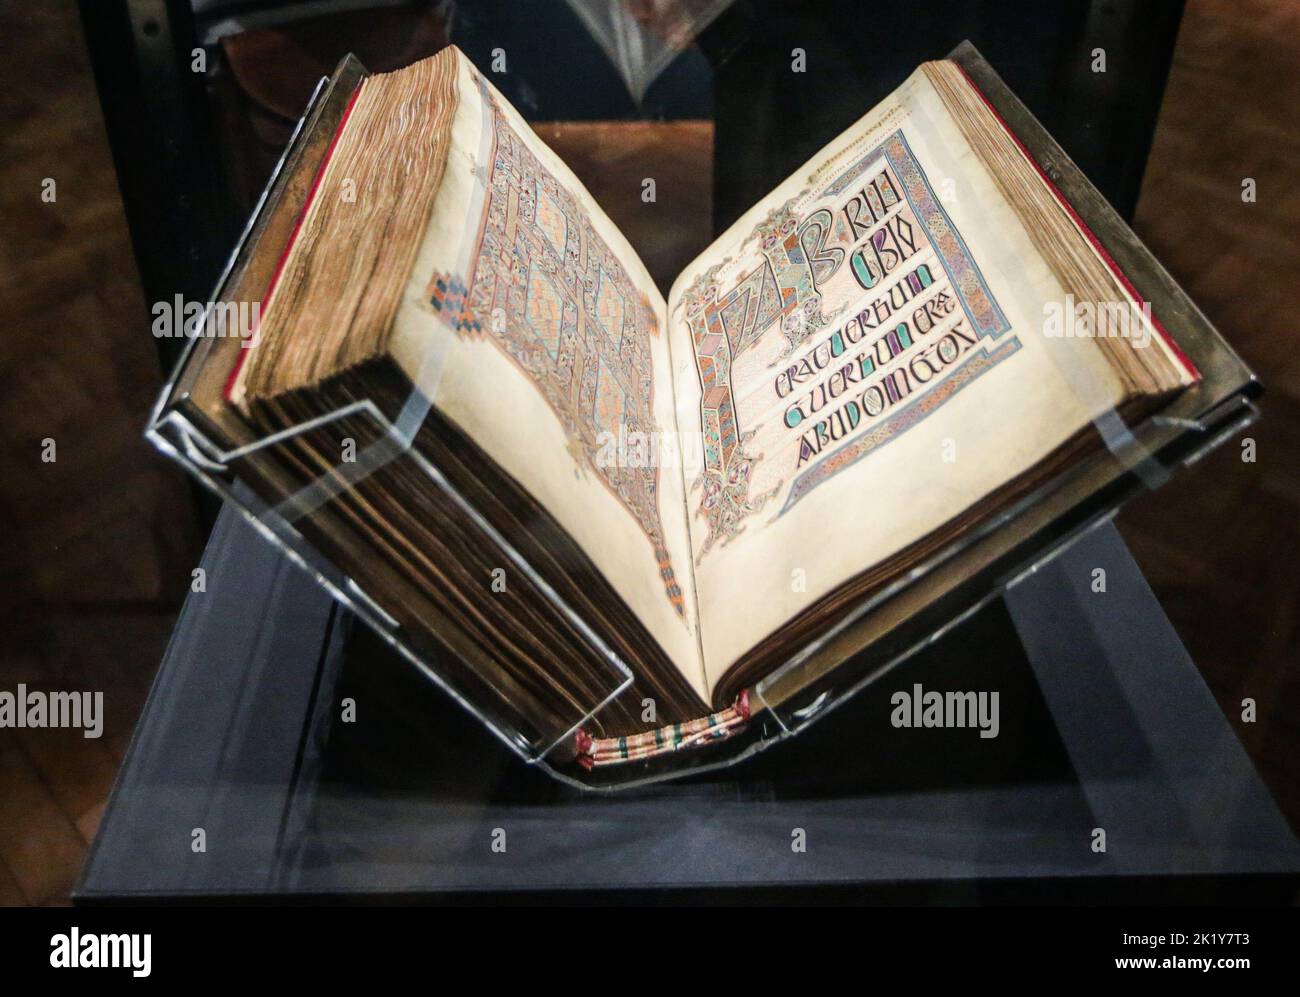 Newcastle Newcastle upon Tyne, England 22 September  2022 The exhibition  celebrate the most spectacular surviving manuscript from early medieval Britain . Paul Quezada-Neiman/Alamy Live News Stock Photo